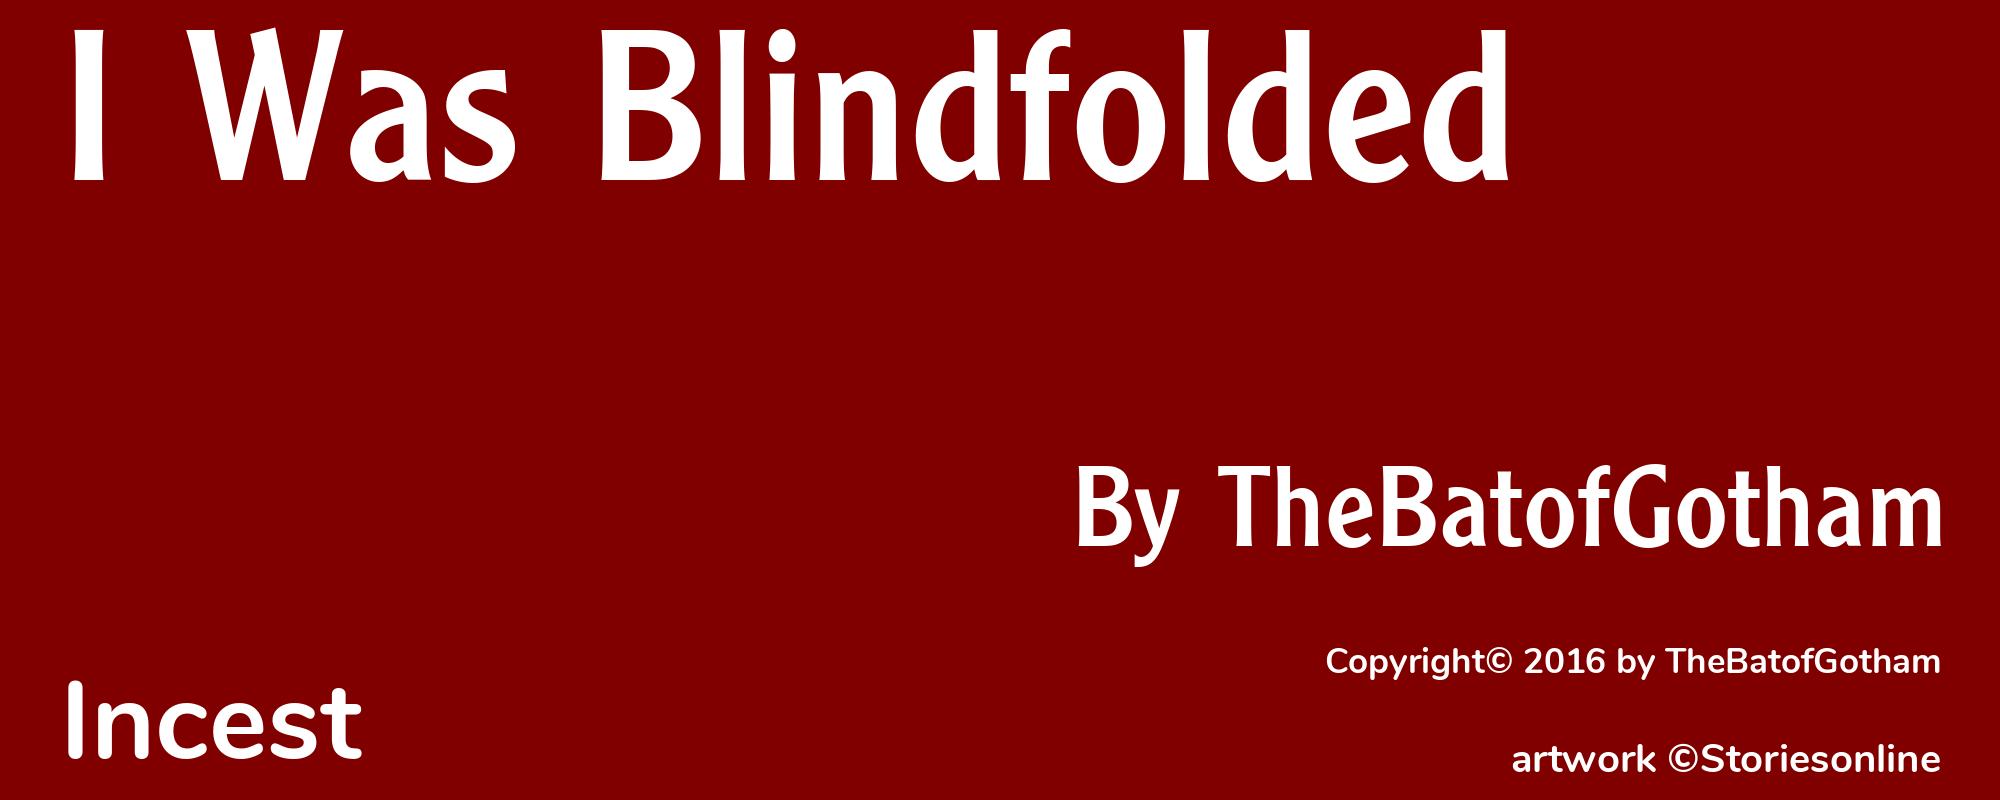 I Was Blindfolded - Cover